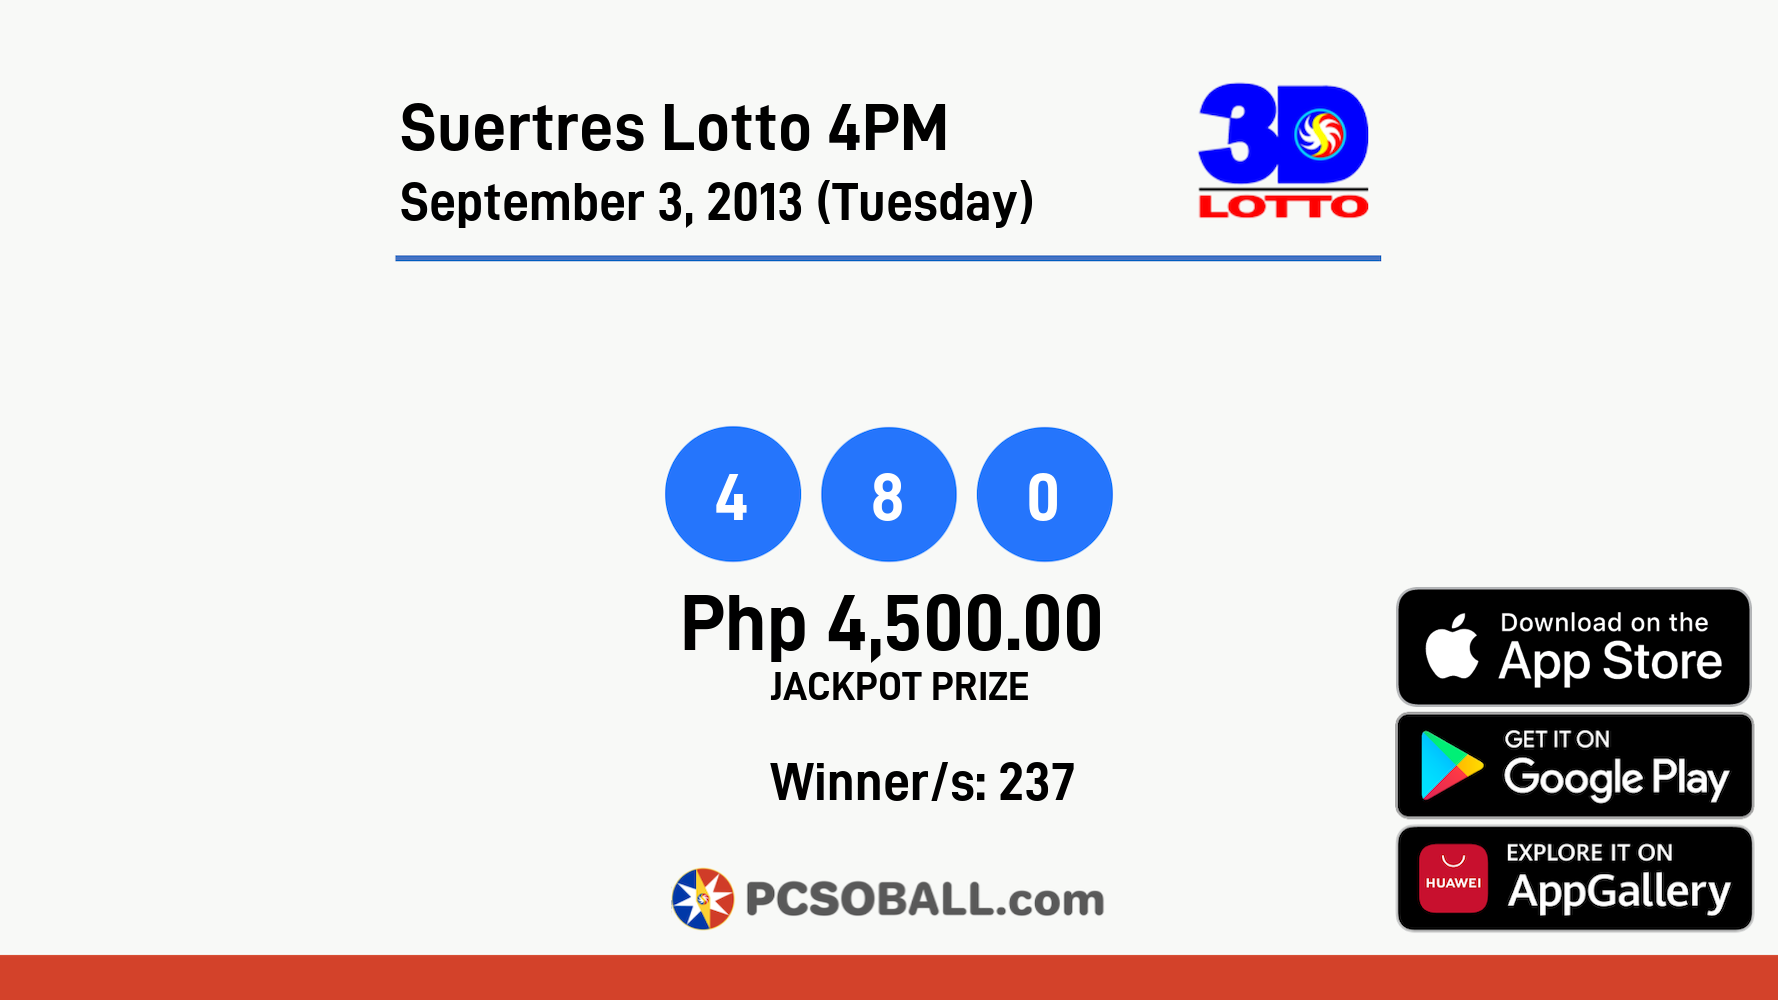 Suertres Lotto 4PM September 3, 2013 (Tuesday) Result